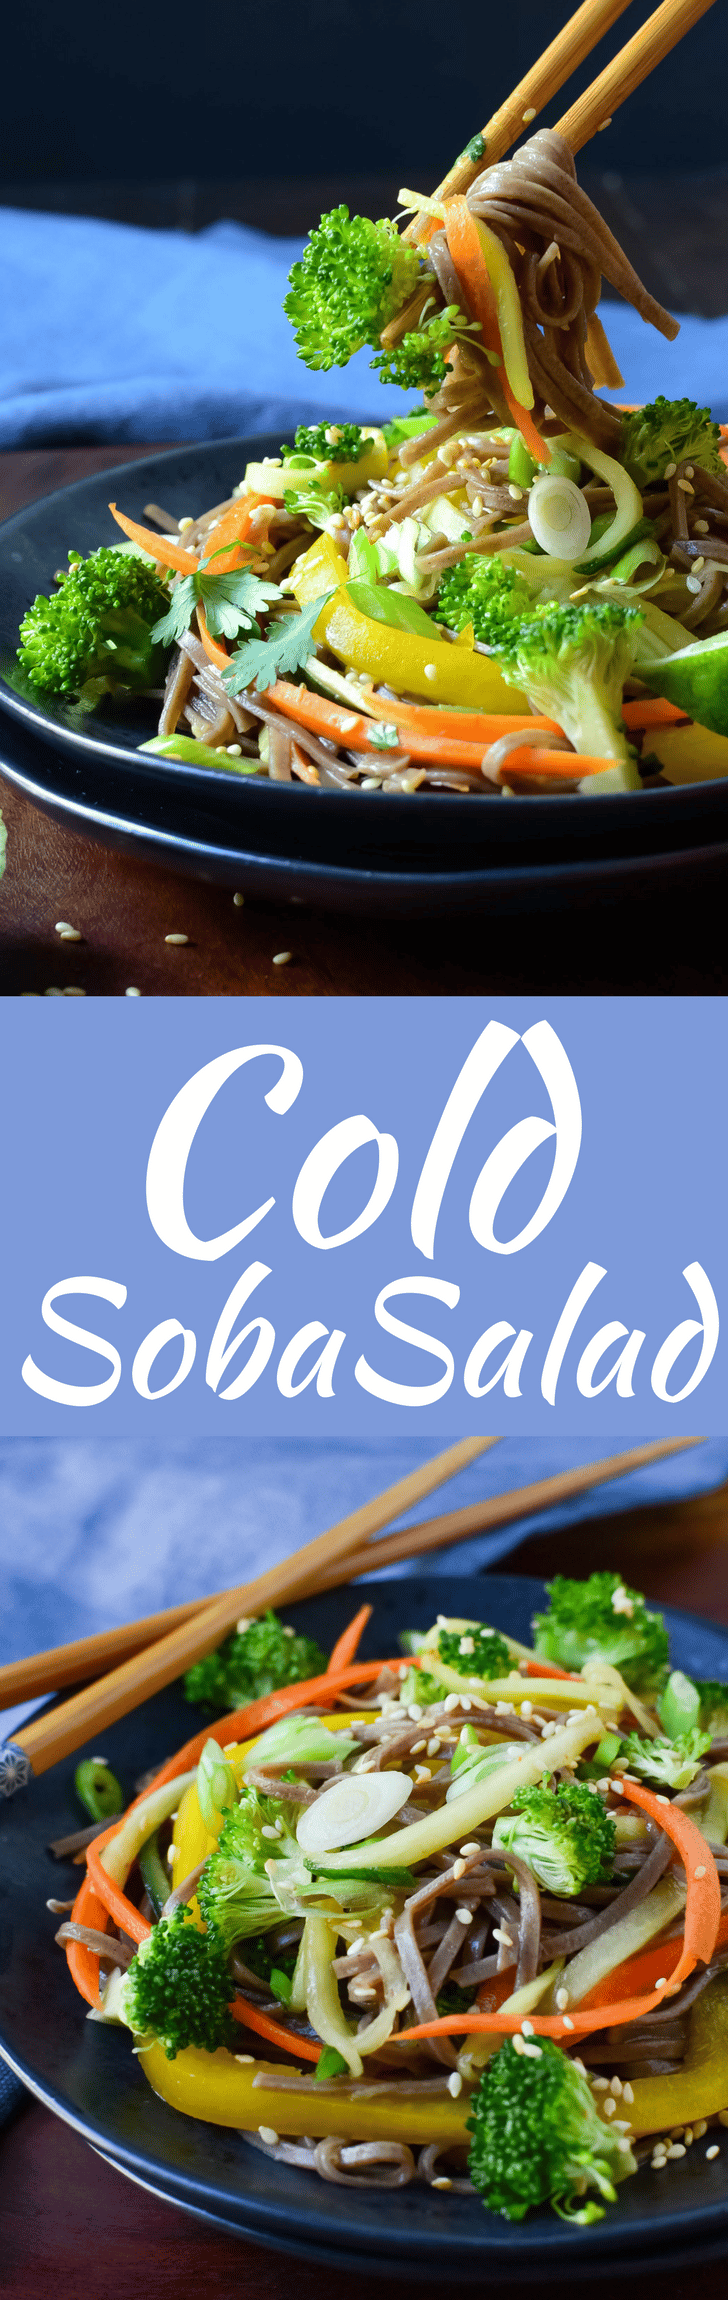 The best recipe for a hot day is this easy Cold Soba Salad with thinly sliced vegetables and an Asian-dressing that will fill you up & cool you off!